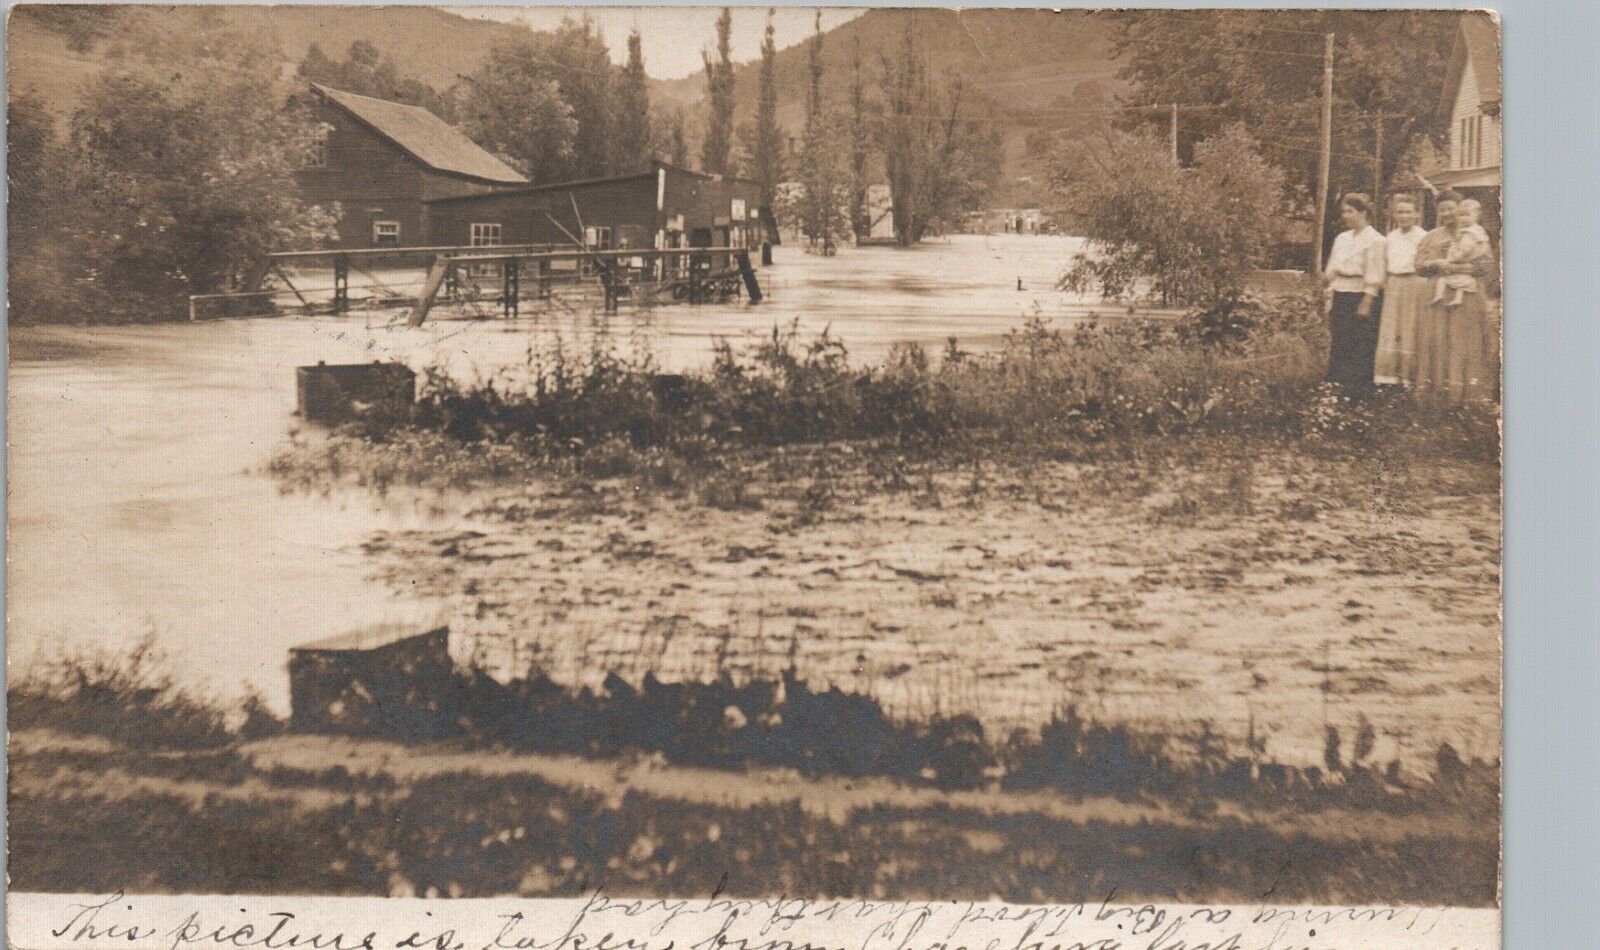 FLOODED CREEK chaseburg wi real photo postcard rppc wisconsin history disaster